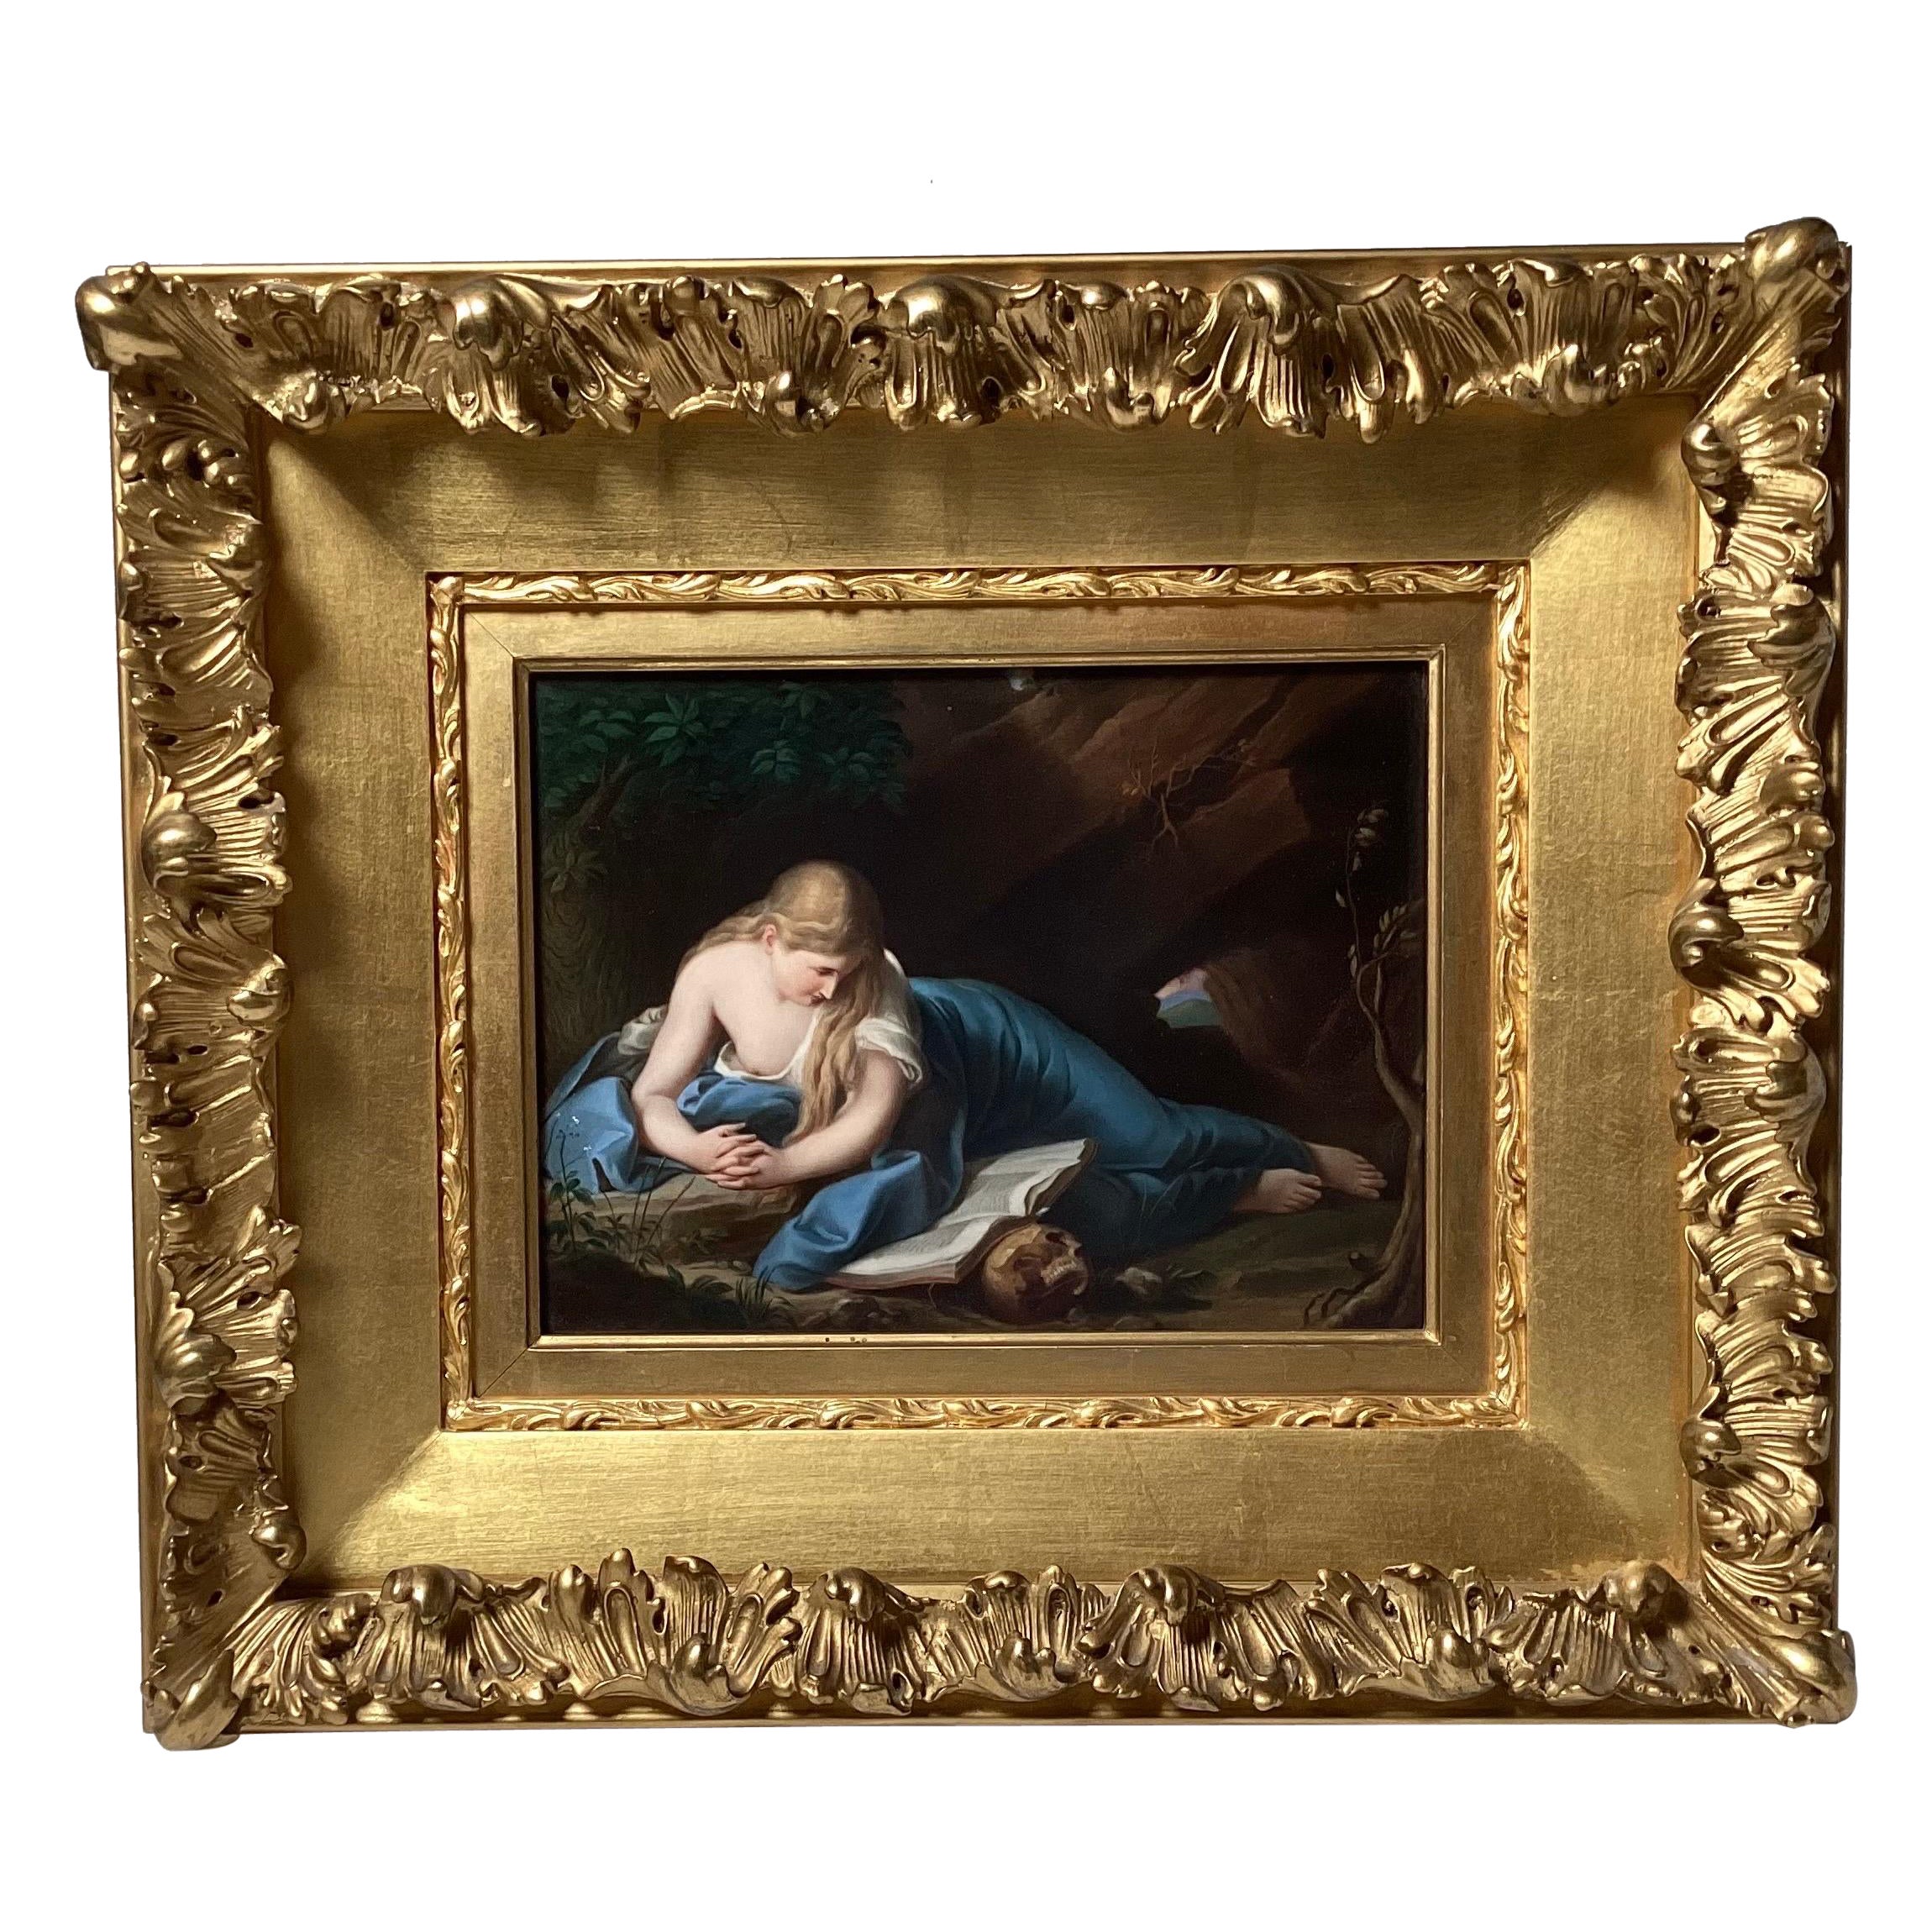 A 19th Century KPM Porcelain Plaque of Mary Magdalene